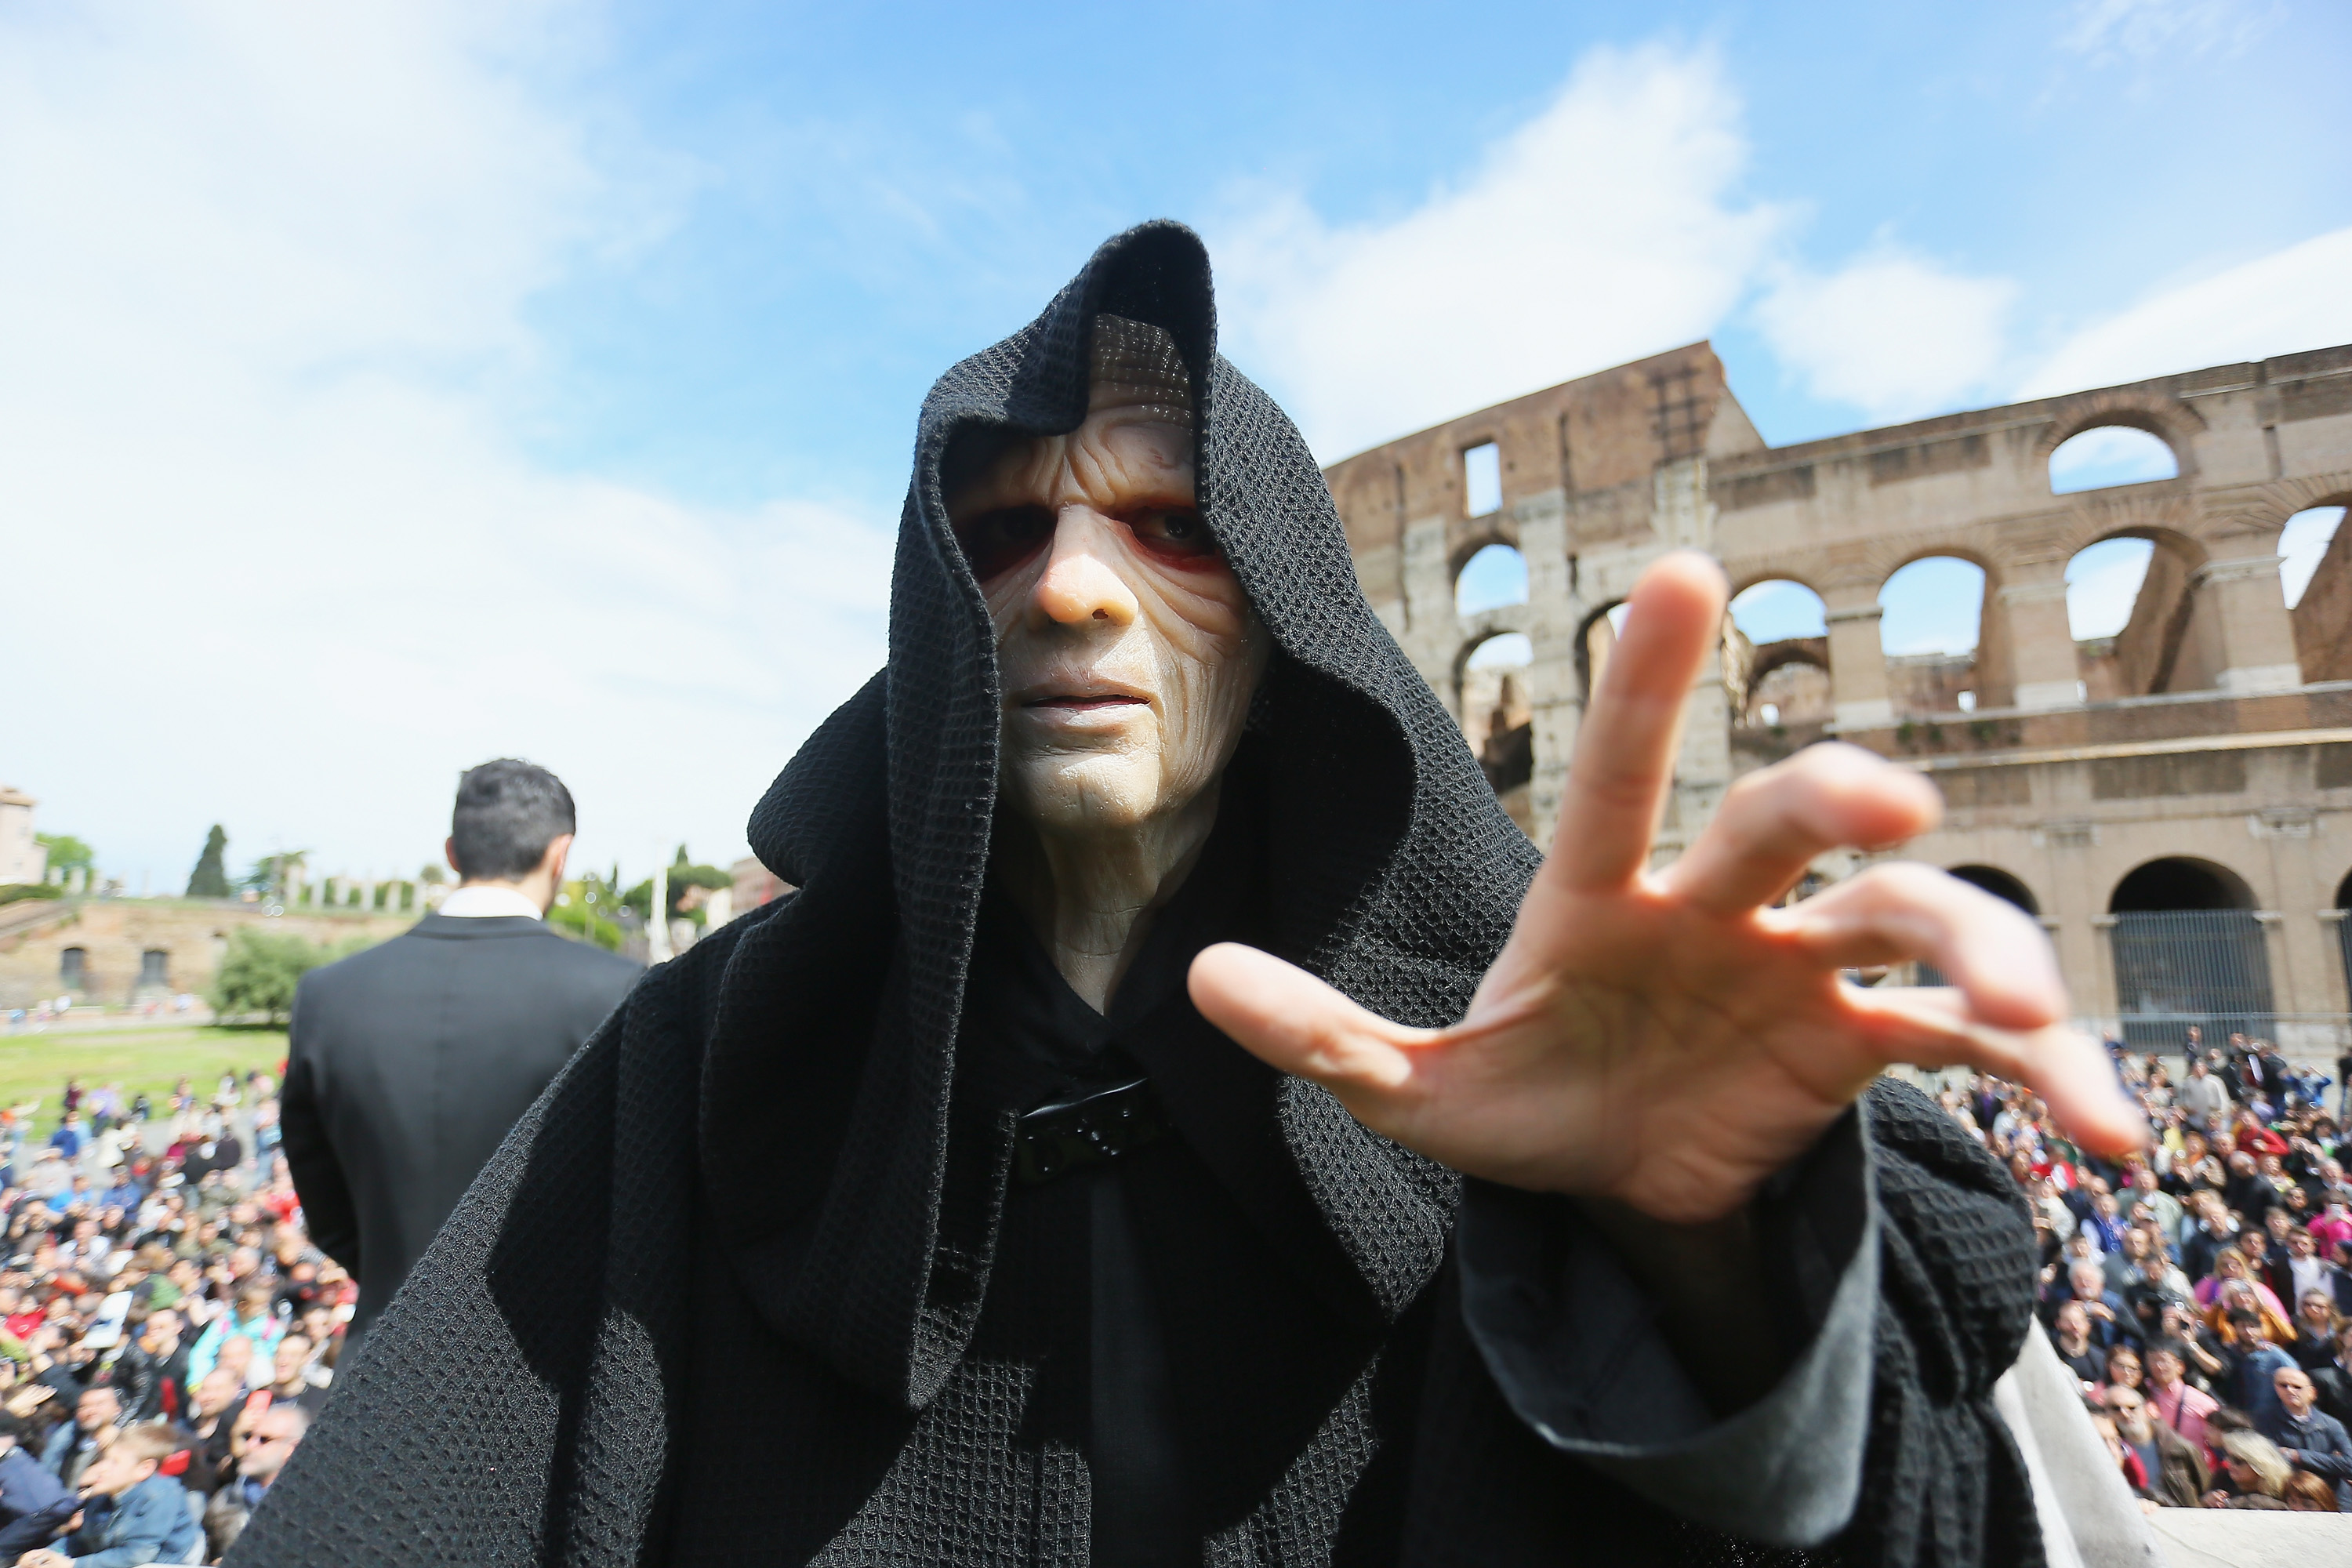 An Emperor Palpatine cosplayer by the Colosseum